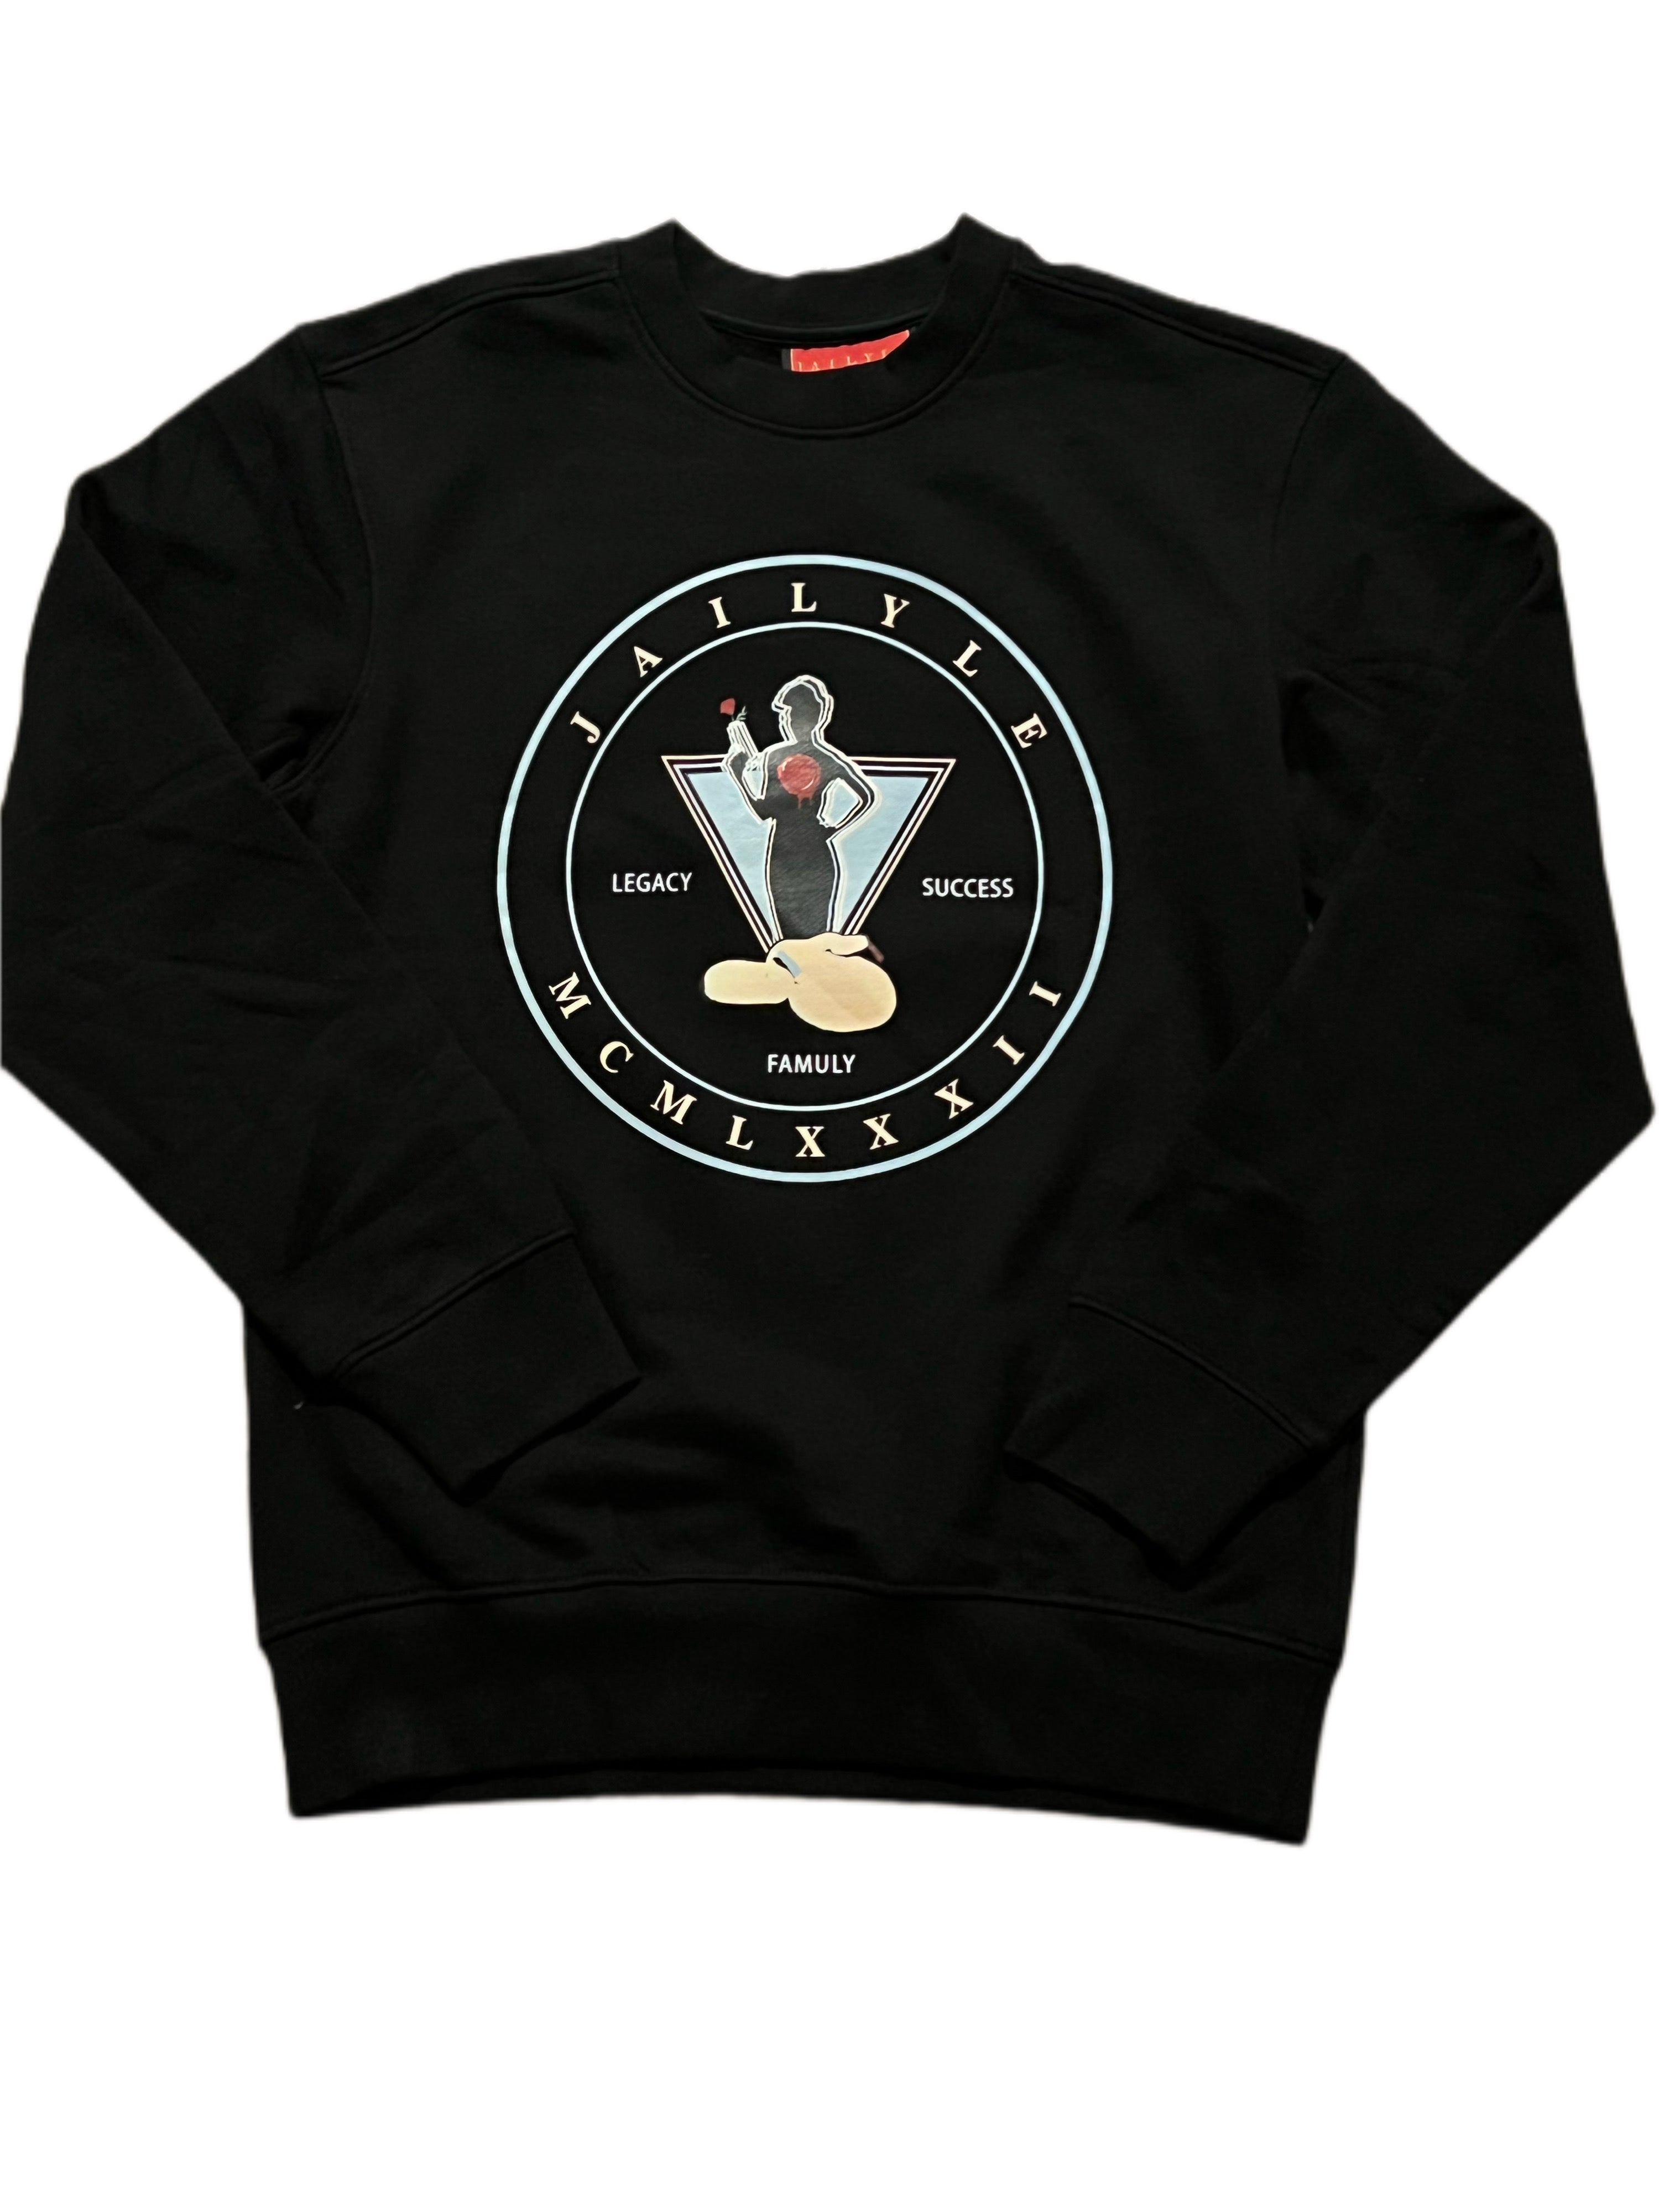 &quot;LADY of LOVE &amp; PROTECTION:  LEGACY SUCCESS FAMULY&quot; SWEATSHIRT| BLACK